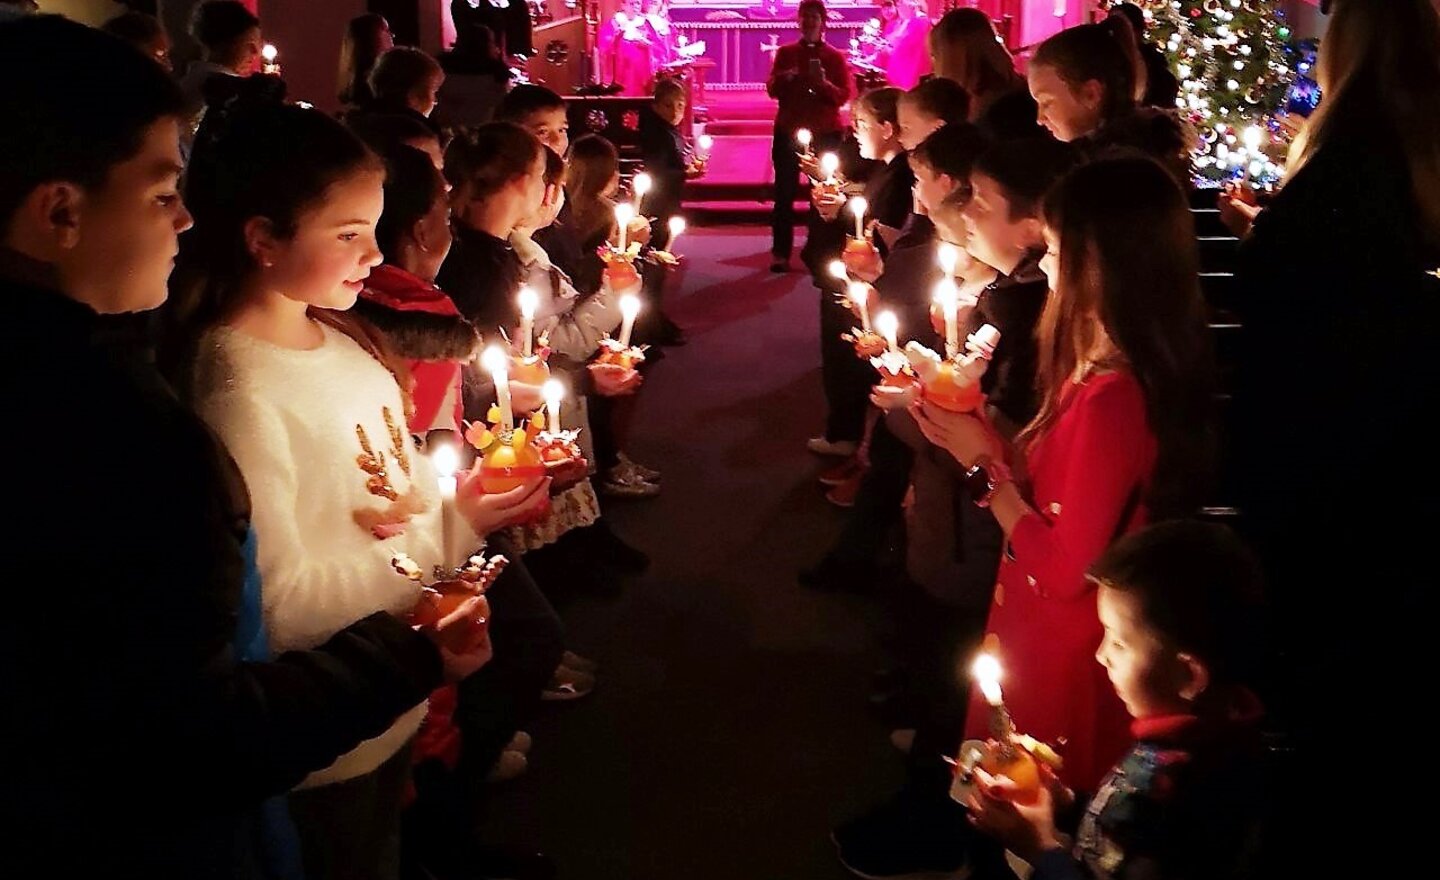 Image of Christingle Service - Part Two